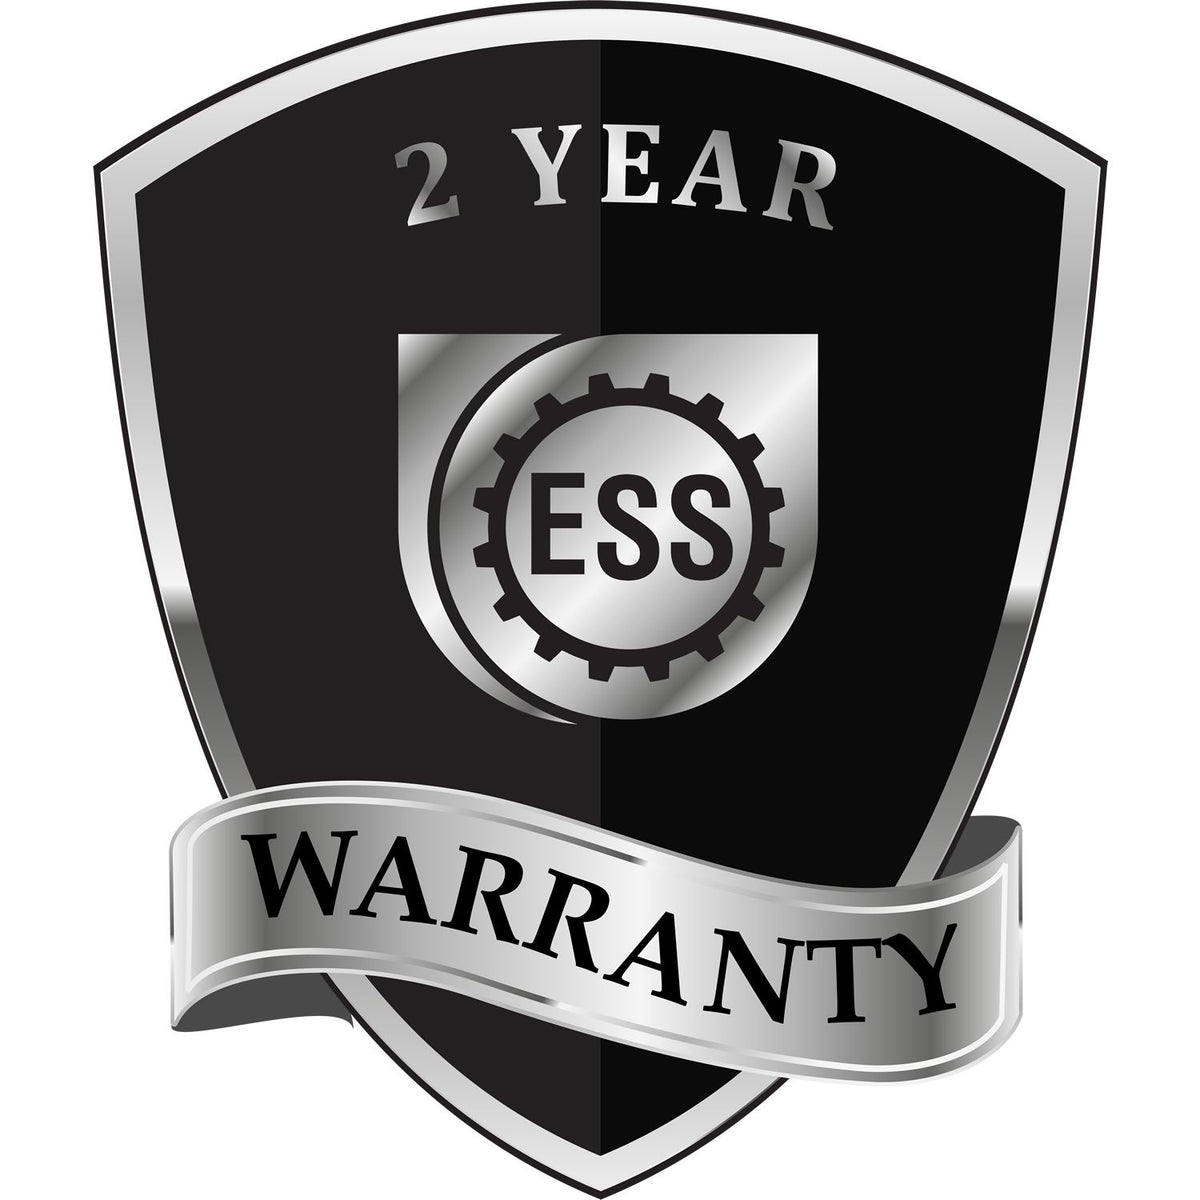 A badge or emblem showing a warranty icon for the Long Reach Nevada Land Surveyor Seal